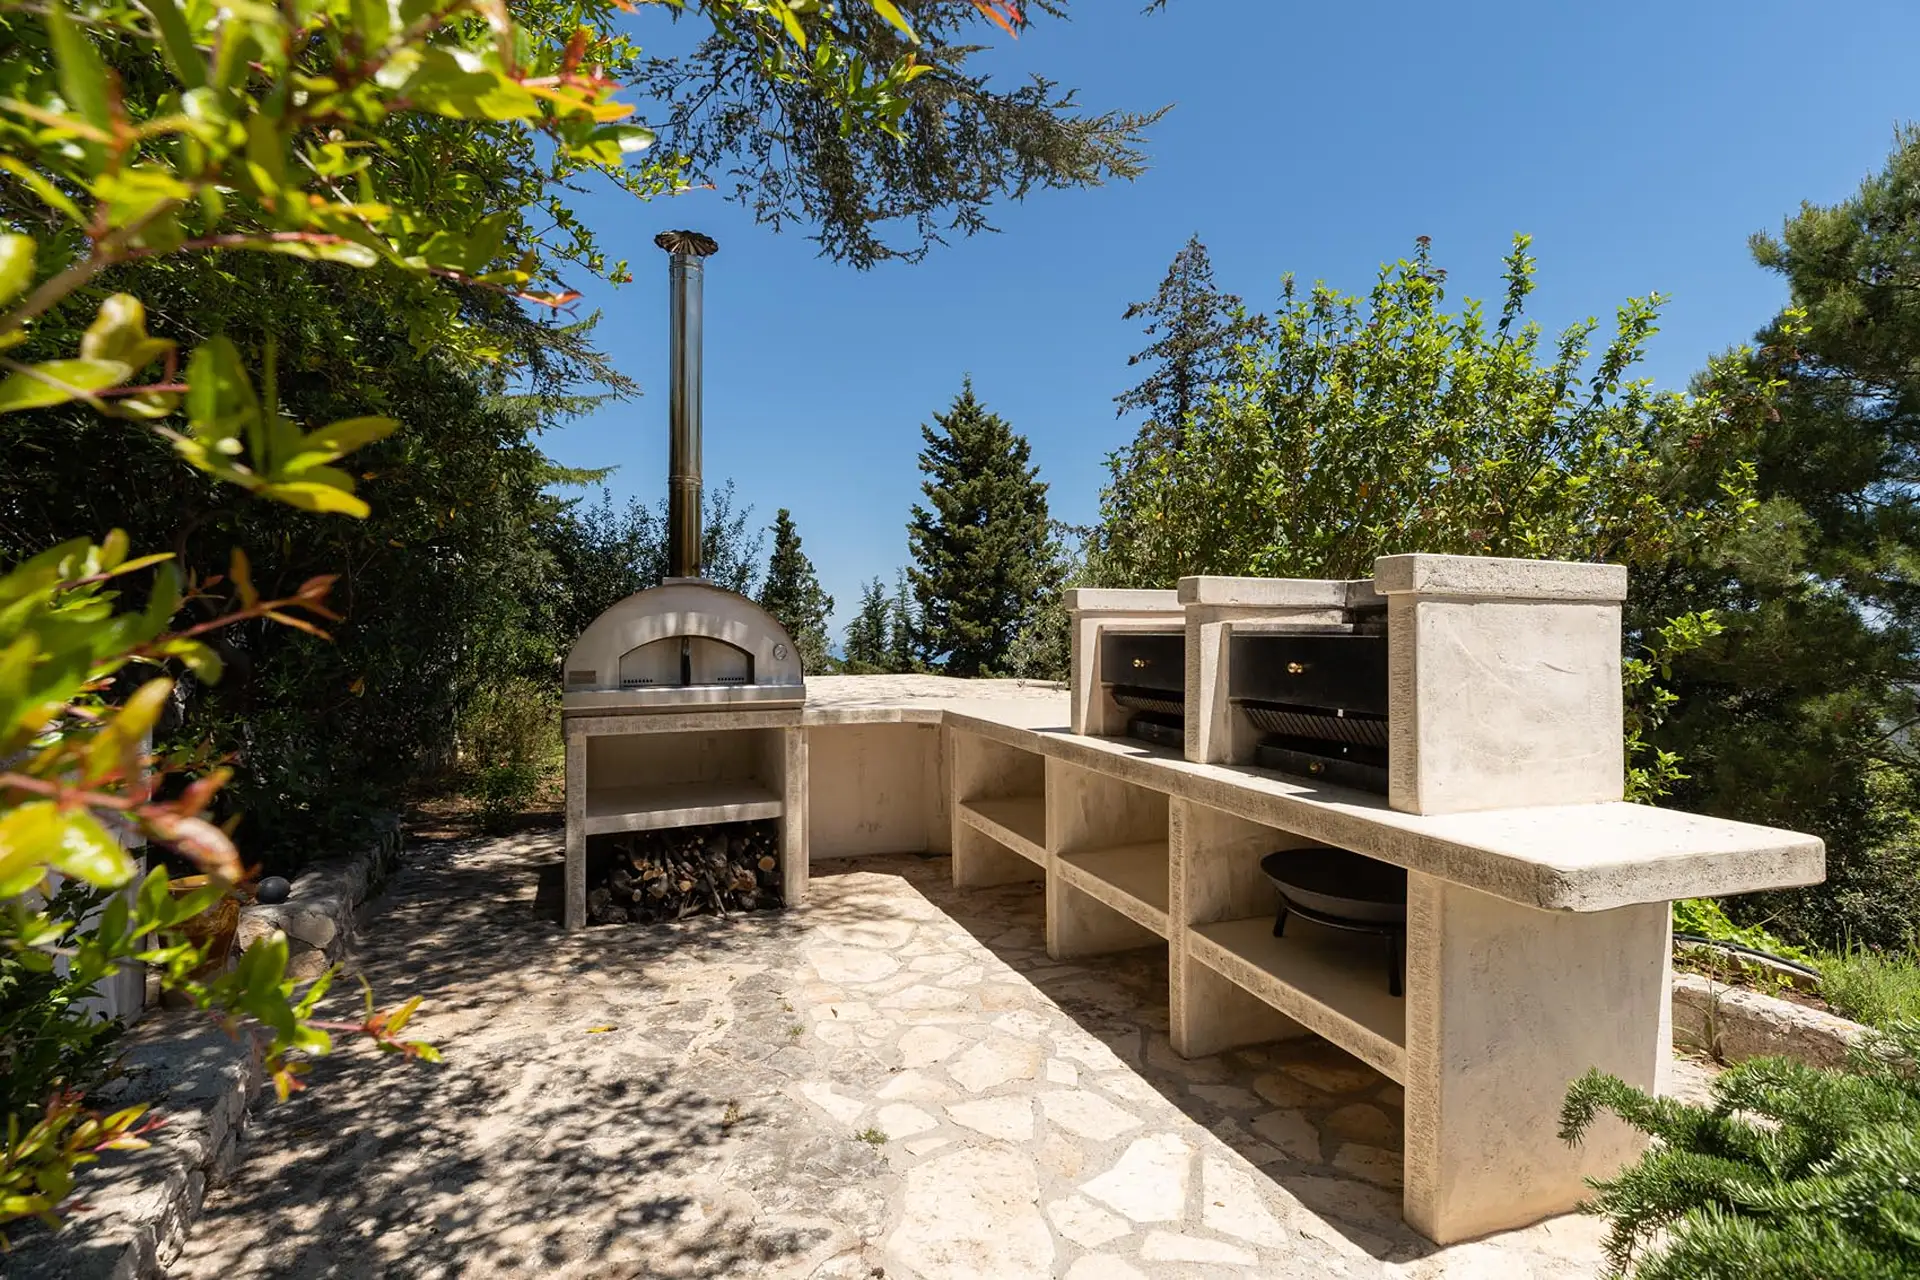 Barbecue and pizza oven